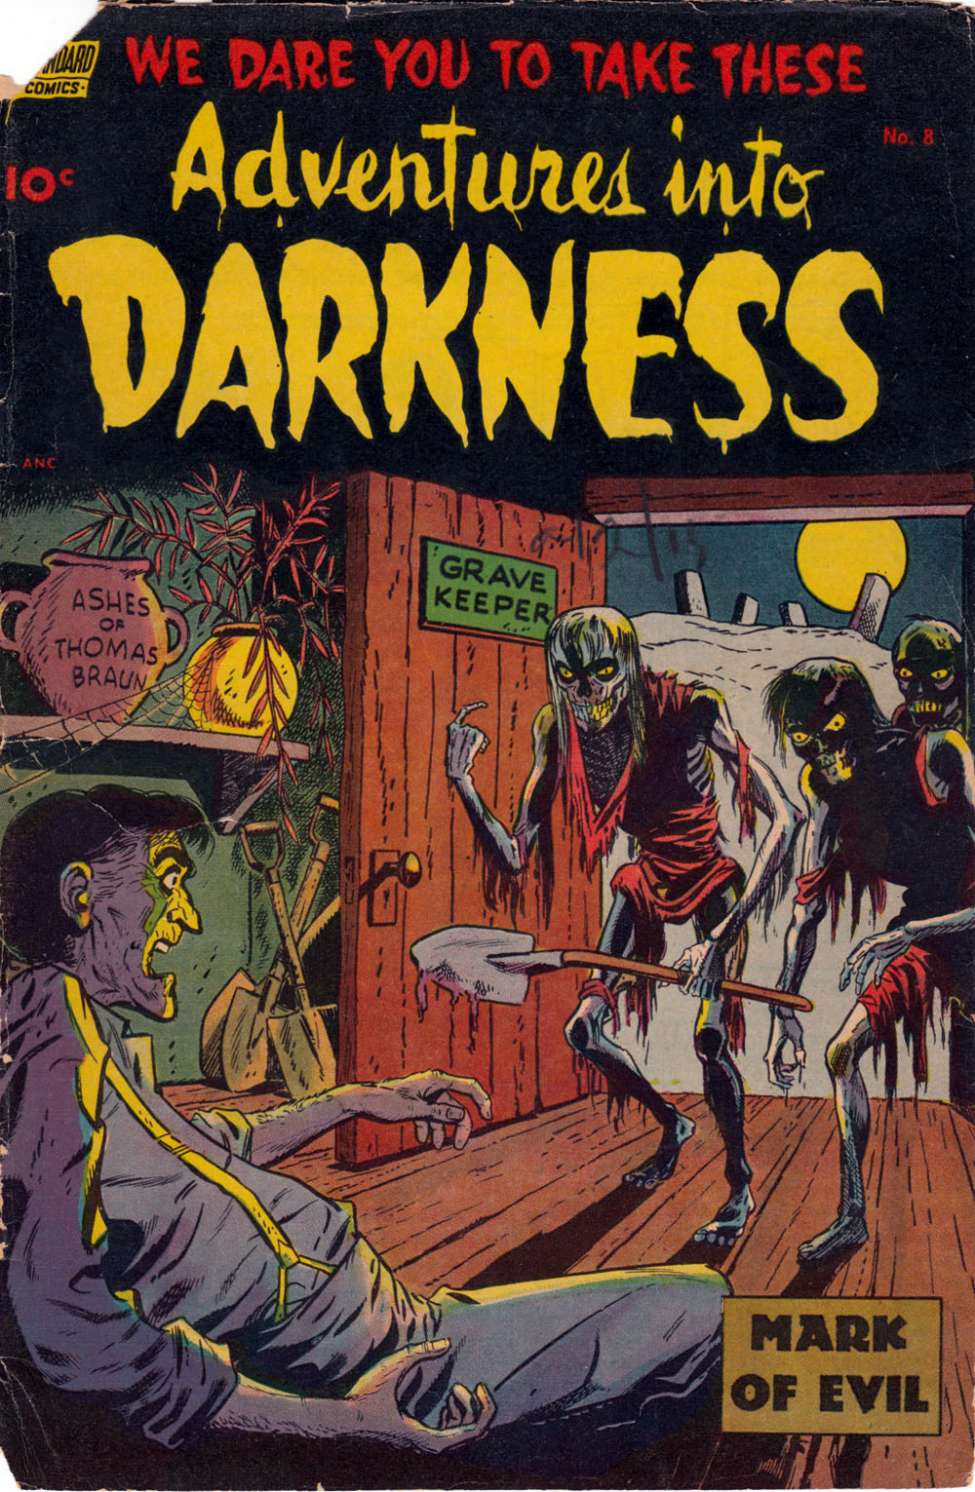 Book Cover For Adventures into Darkness 8